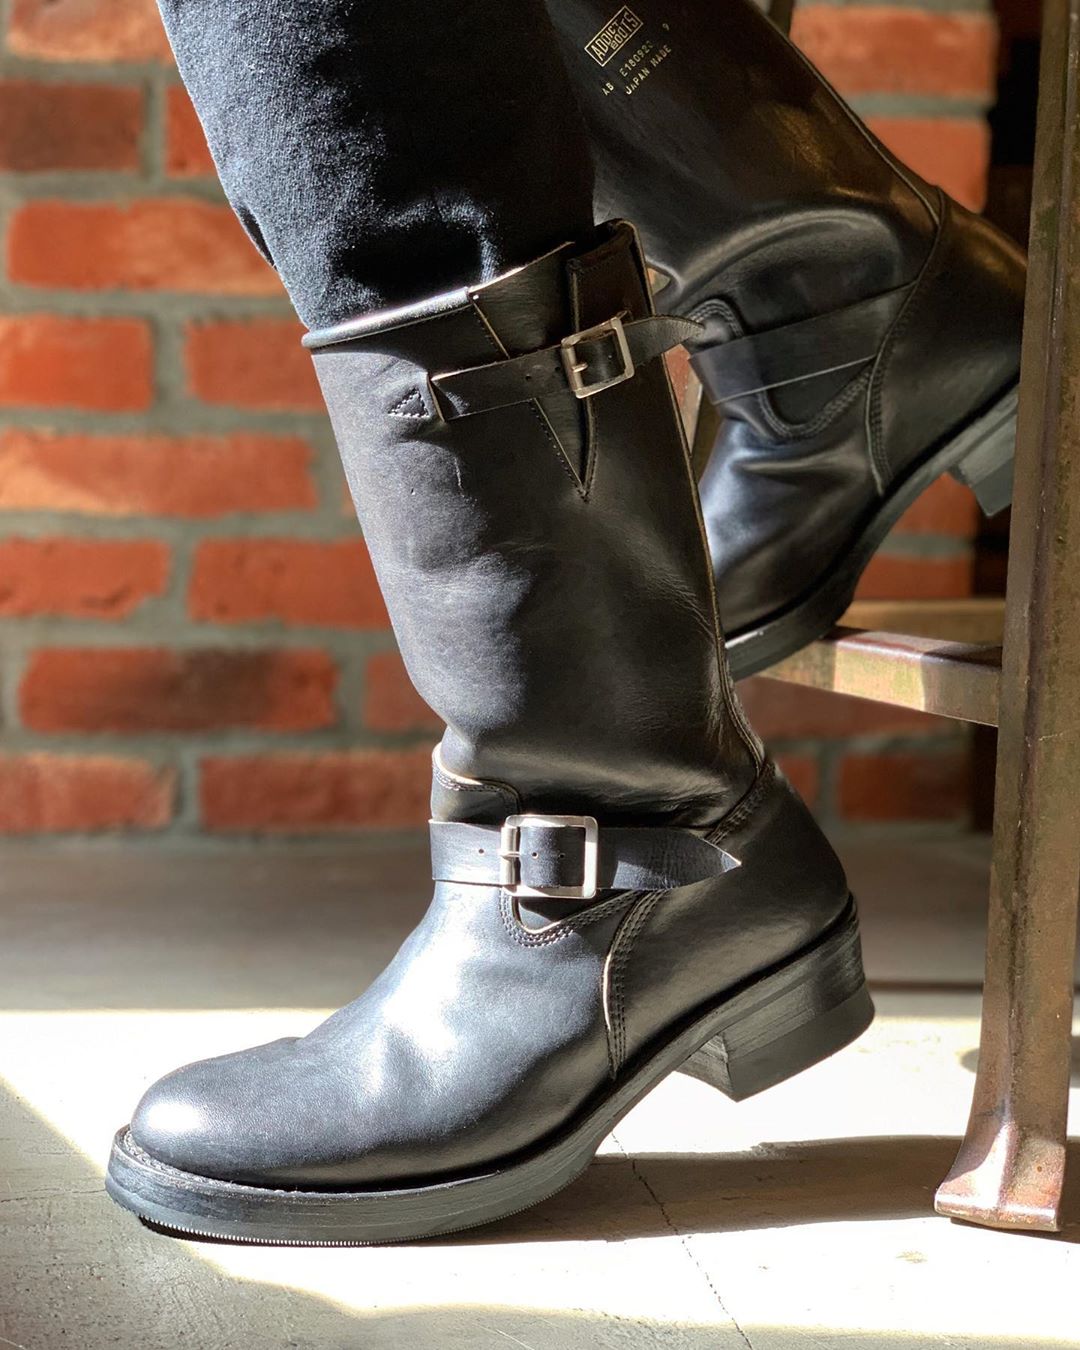 May club -【Addict Clothes】AB-01H HORSEHIDE ENGINEER BOOTS